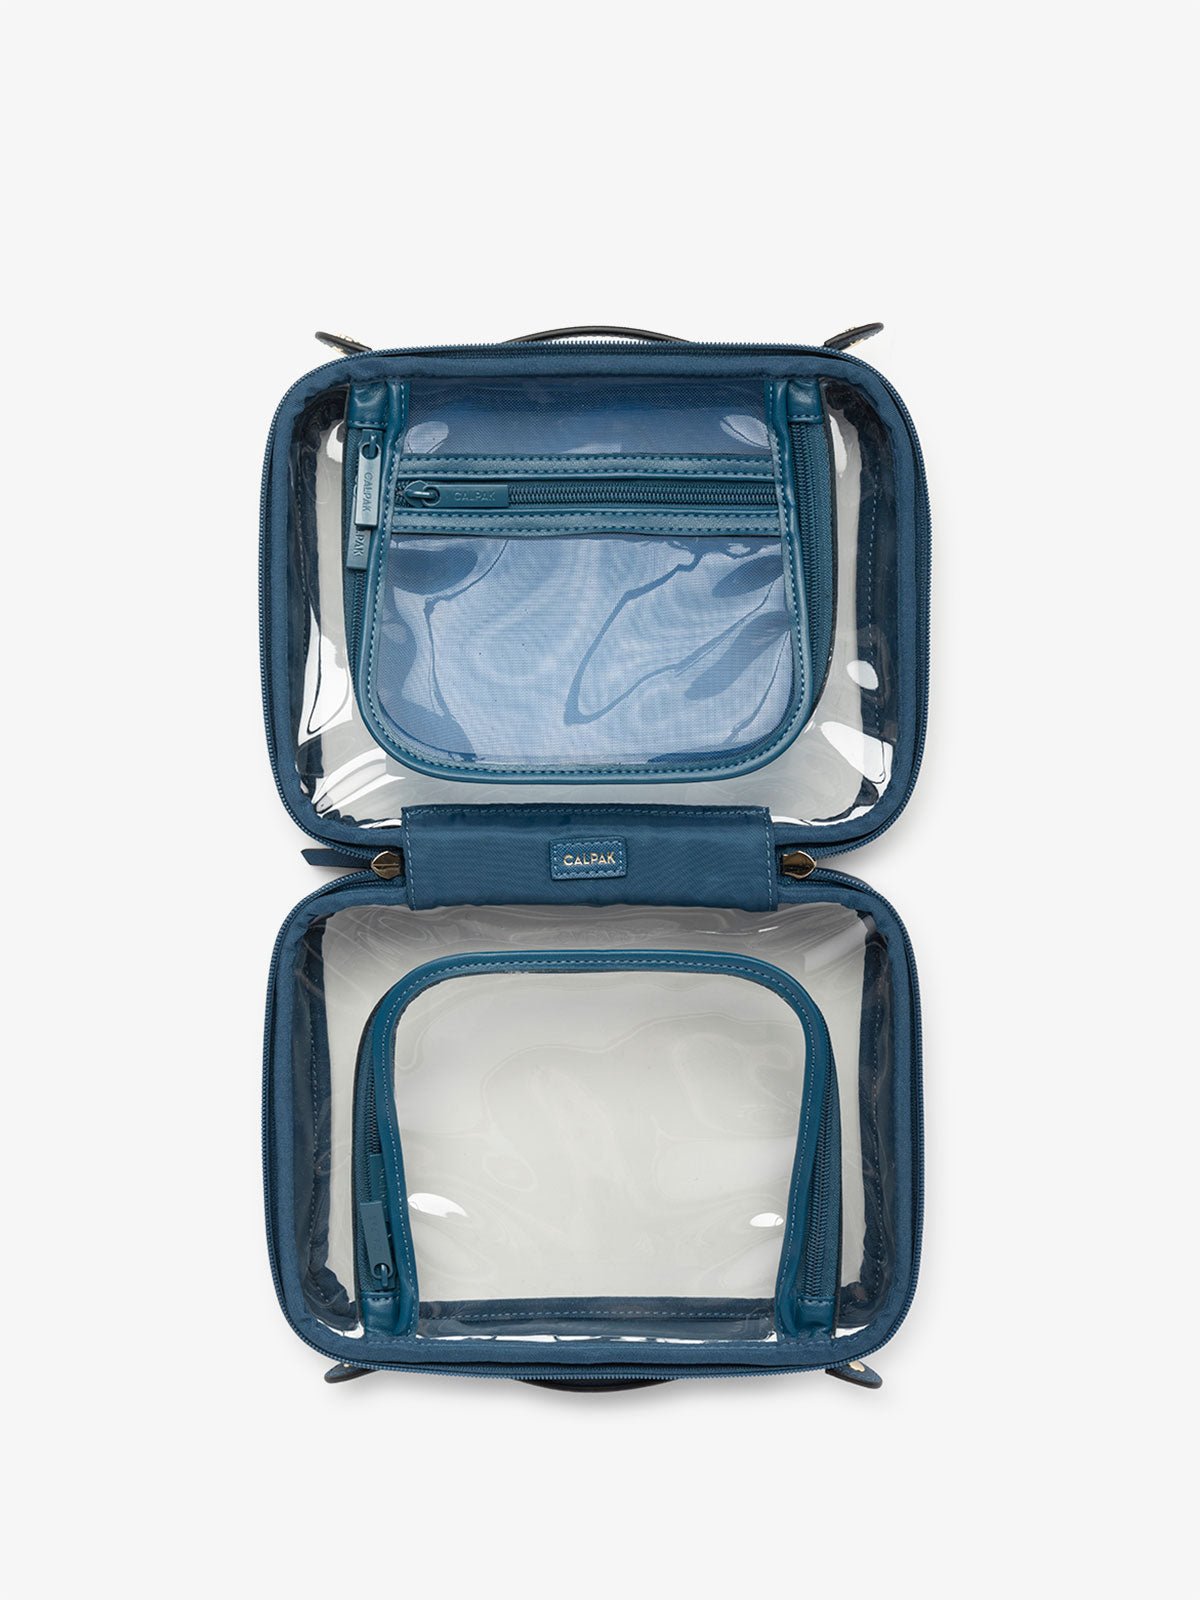 CALPAK clear skincare bag with multiple zippered compartments in dark blue